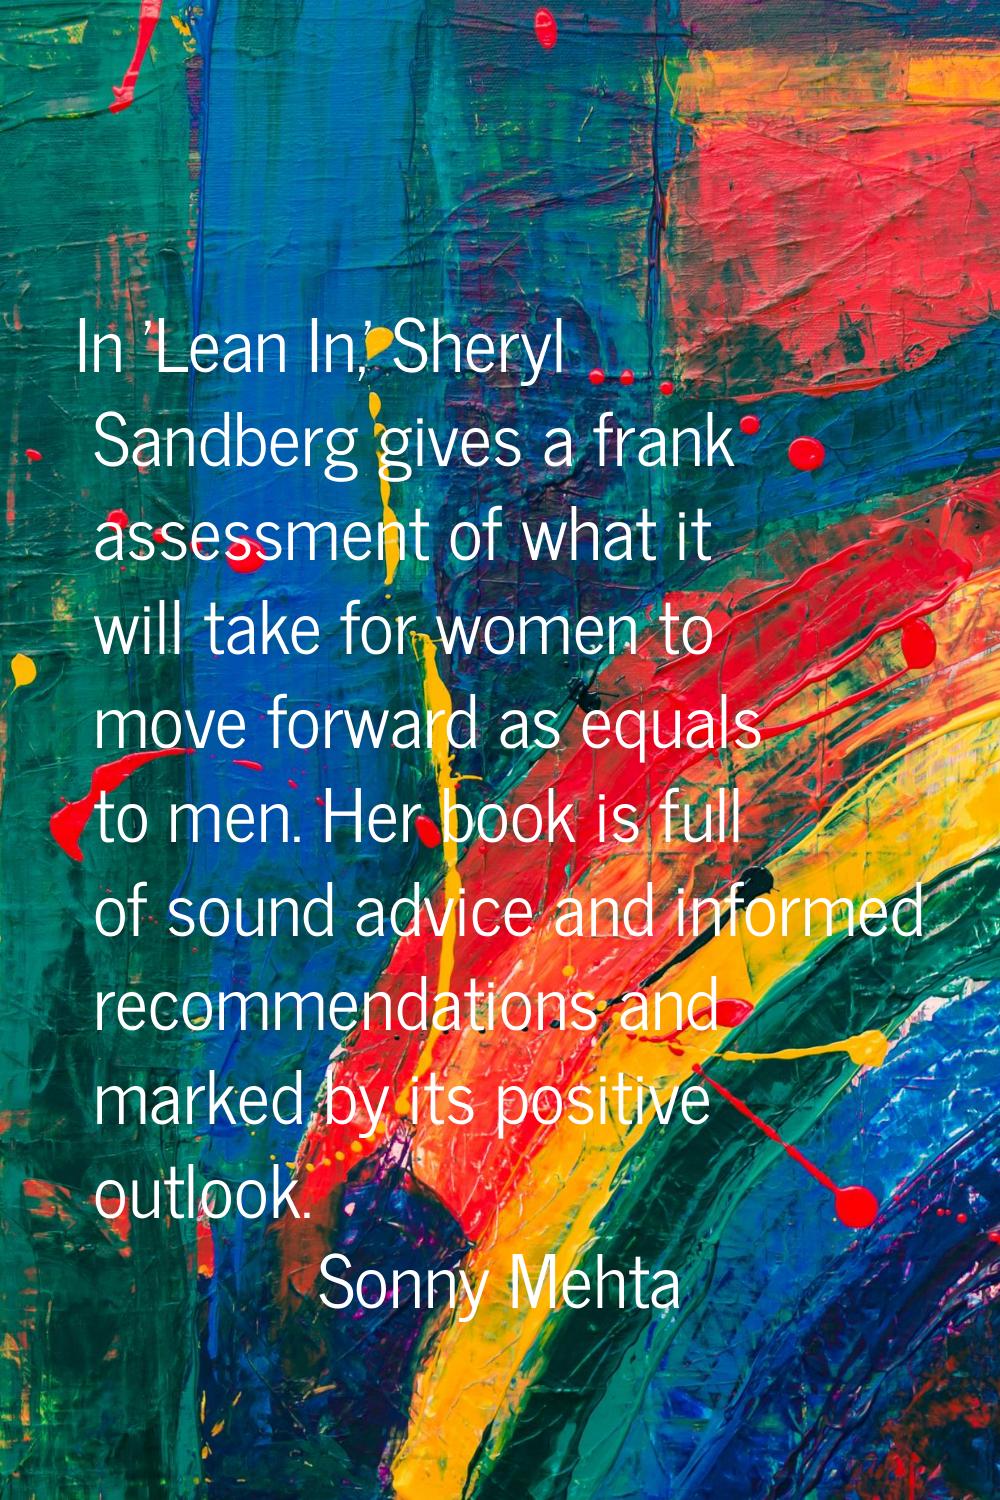 In 'Lean In,' Sheryl Sandberg gives a frank assessment of what it will take for women to move forwa